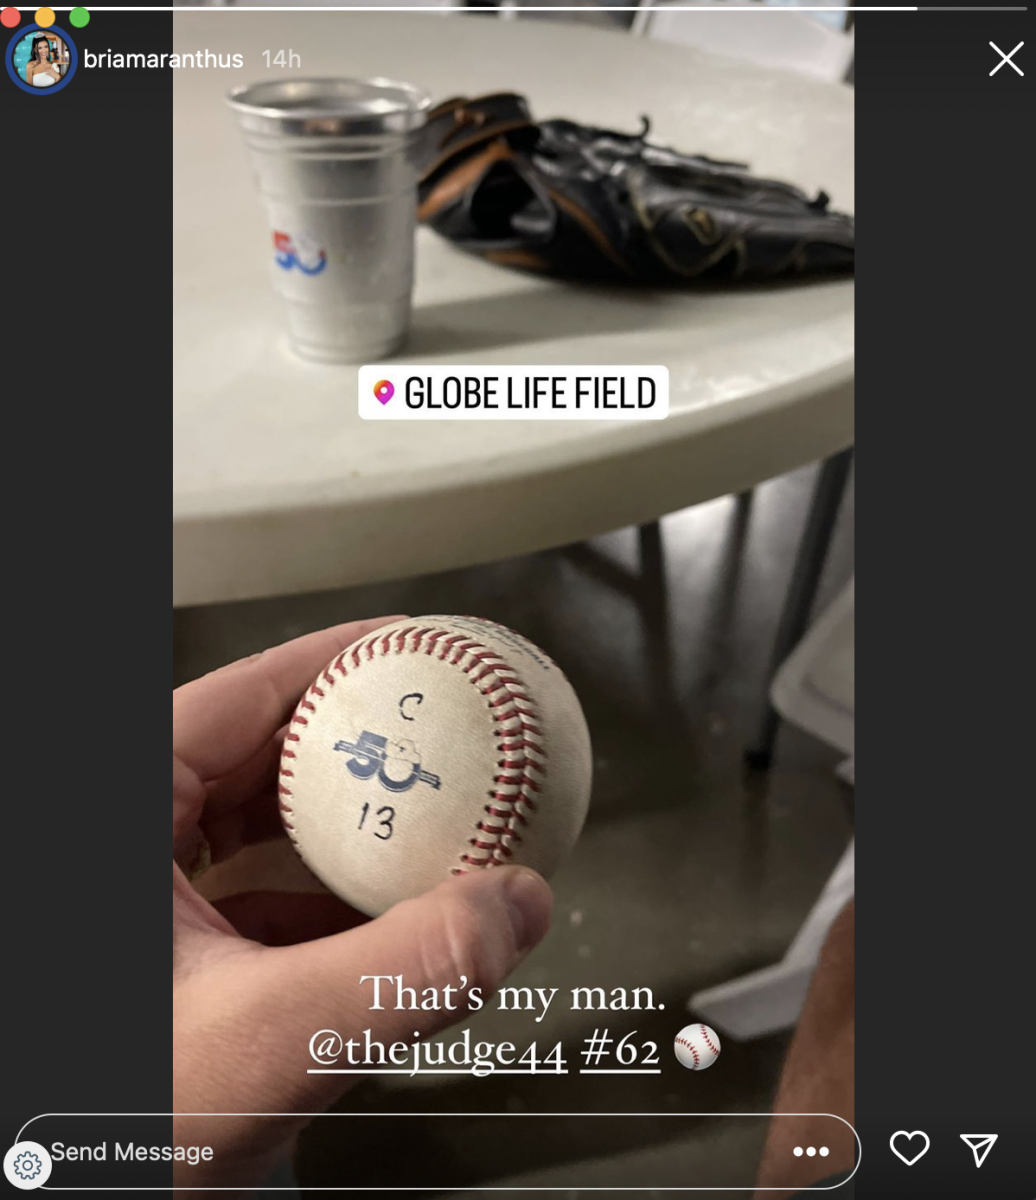 Instagram post from Bri Amaranthus, the wife of Cory Youmans, who caught Aaron Judge's record home run ball.